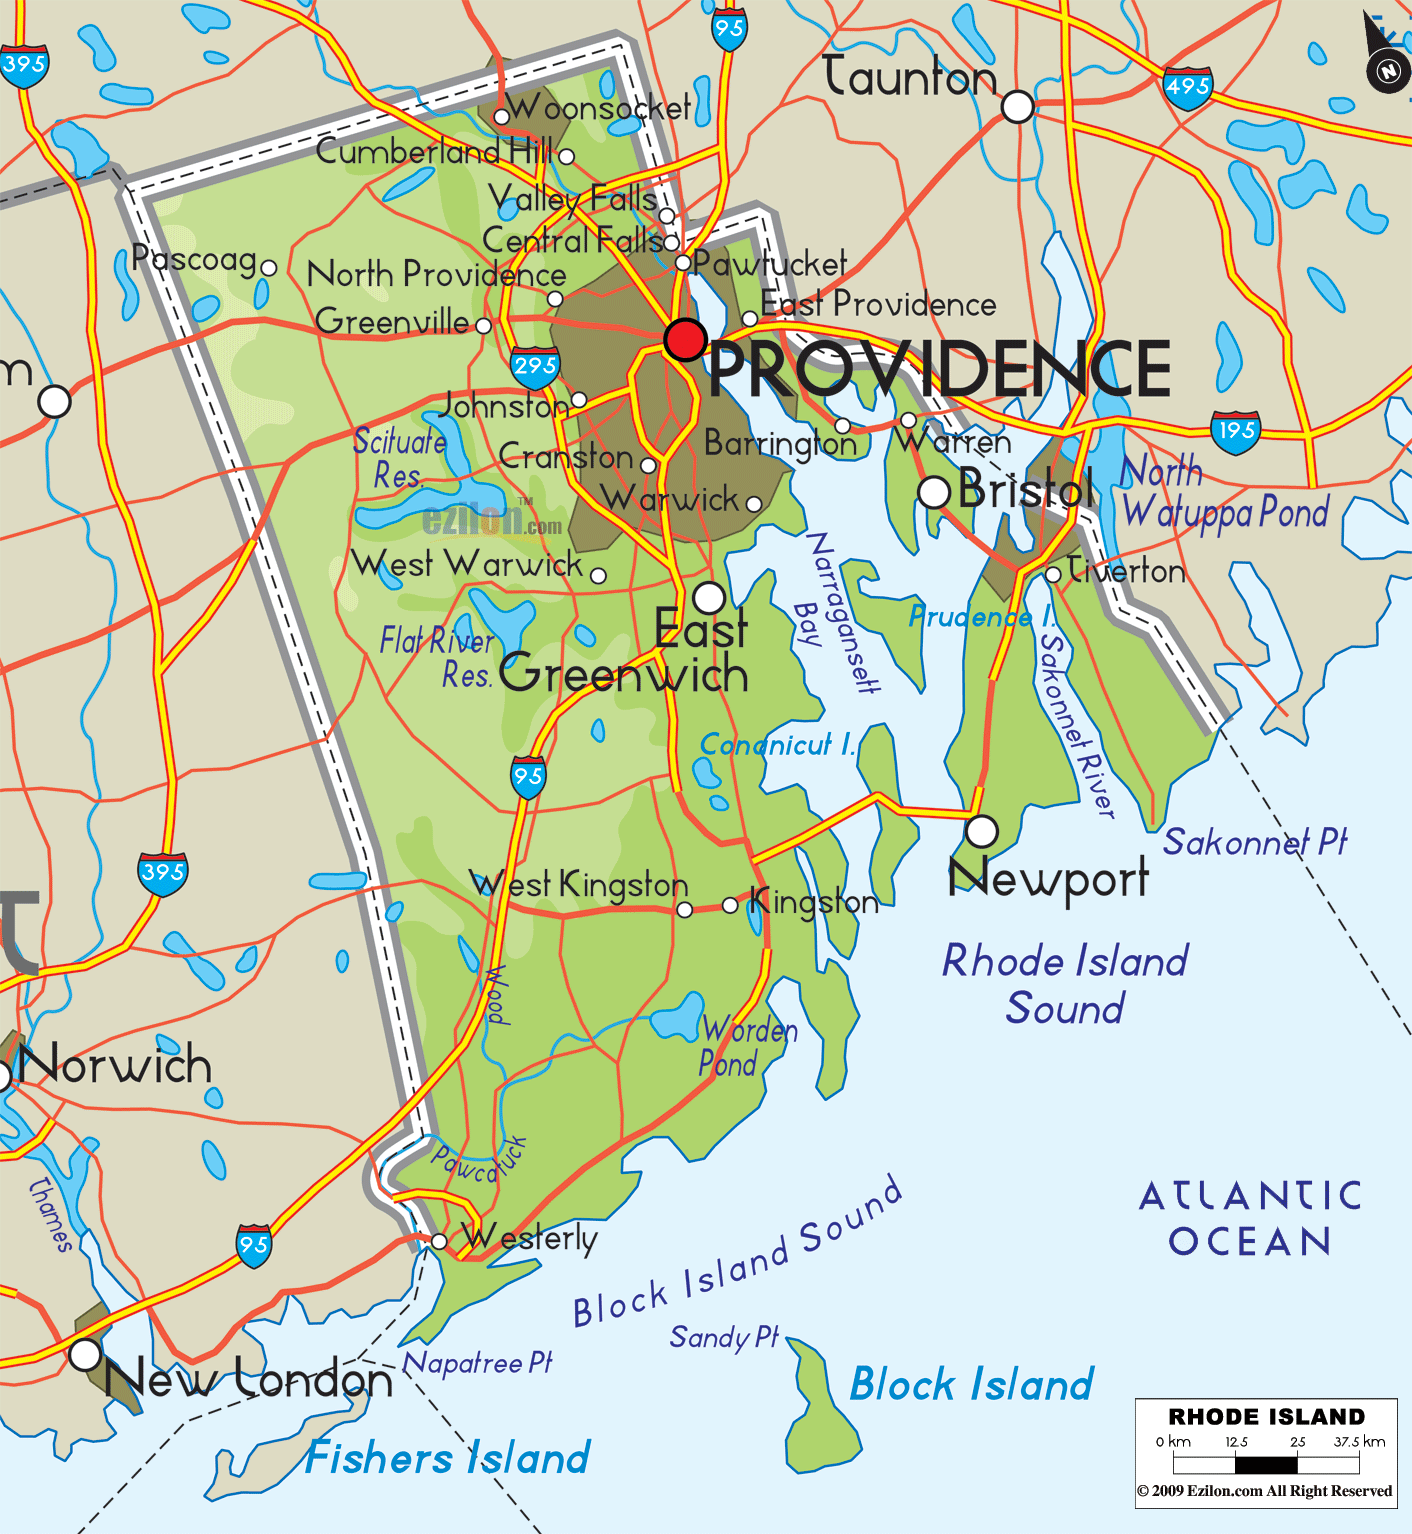 The large detailed Physical map of Rhode Island State, USA showing major geographical features such as islands, rivers, lakes, topography and land formations.